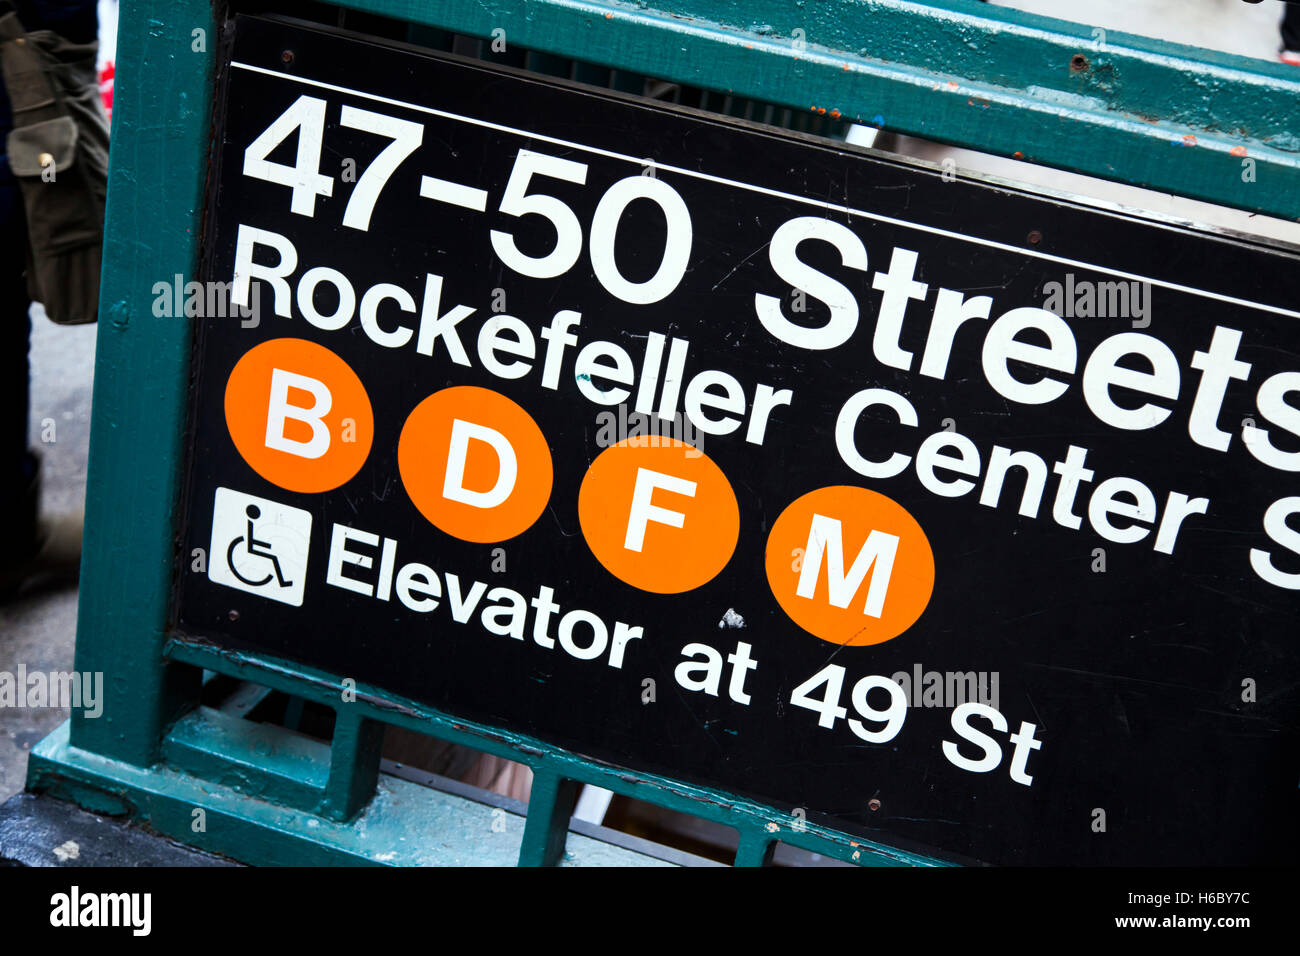 Sign depicting its the entrance to the 47-50 st. Rockefeller Center subway station in Manhattan, New-York. Stock Photo